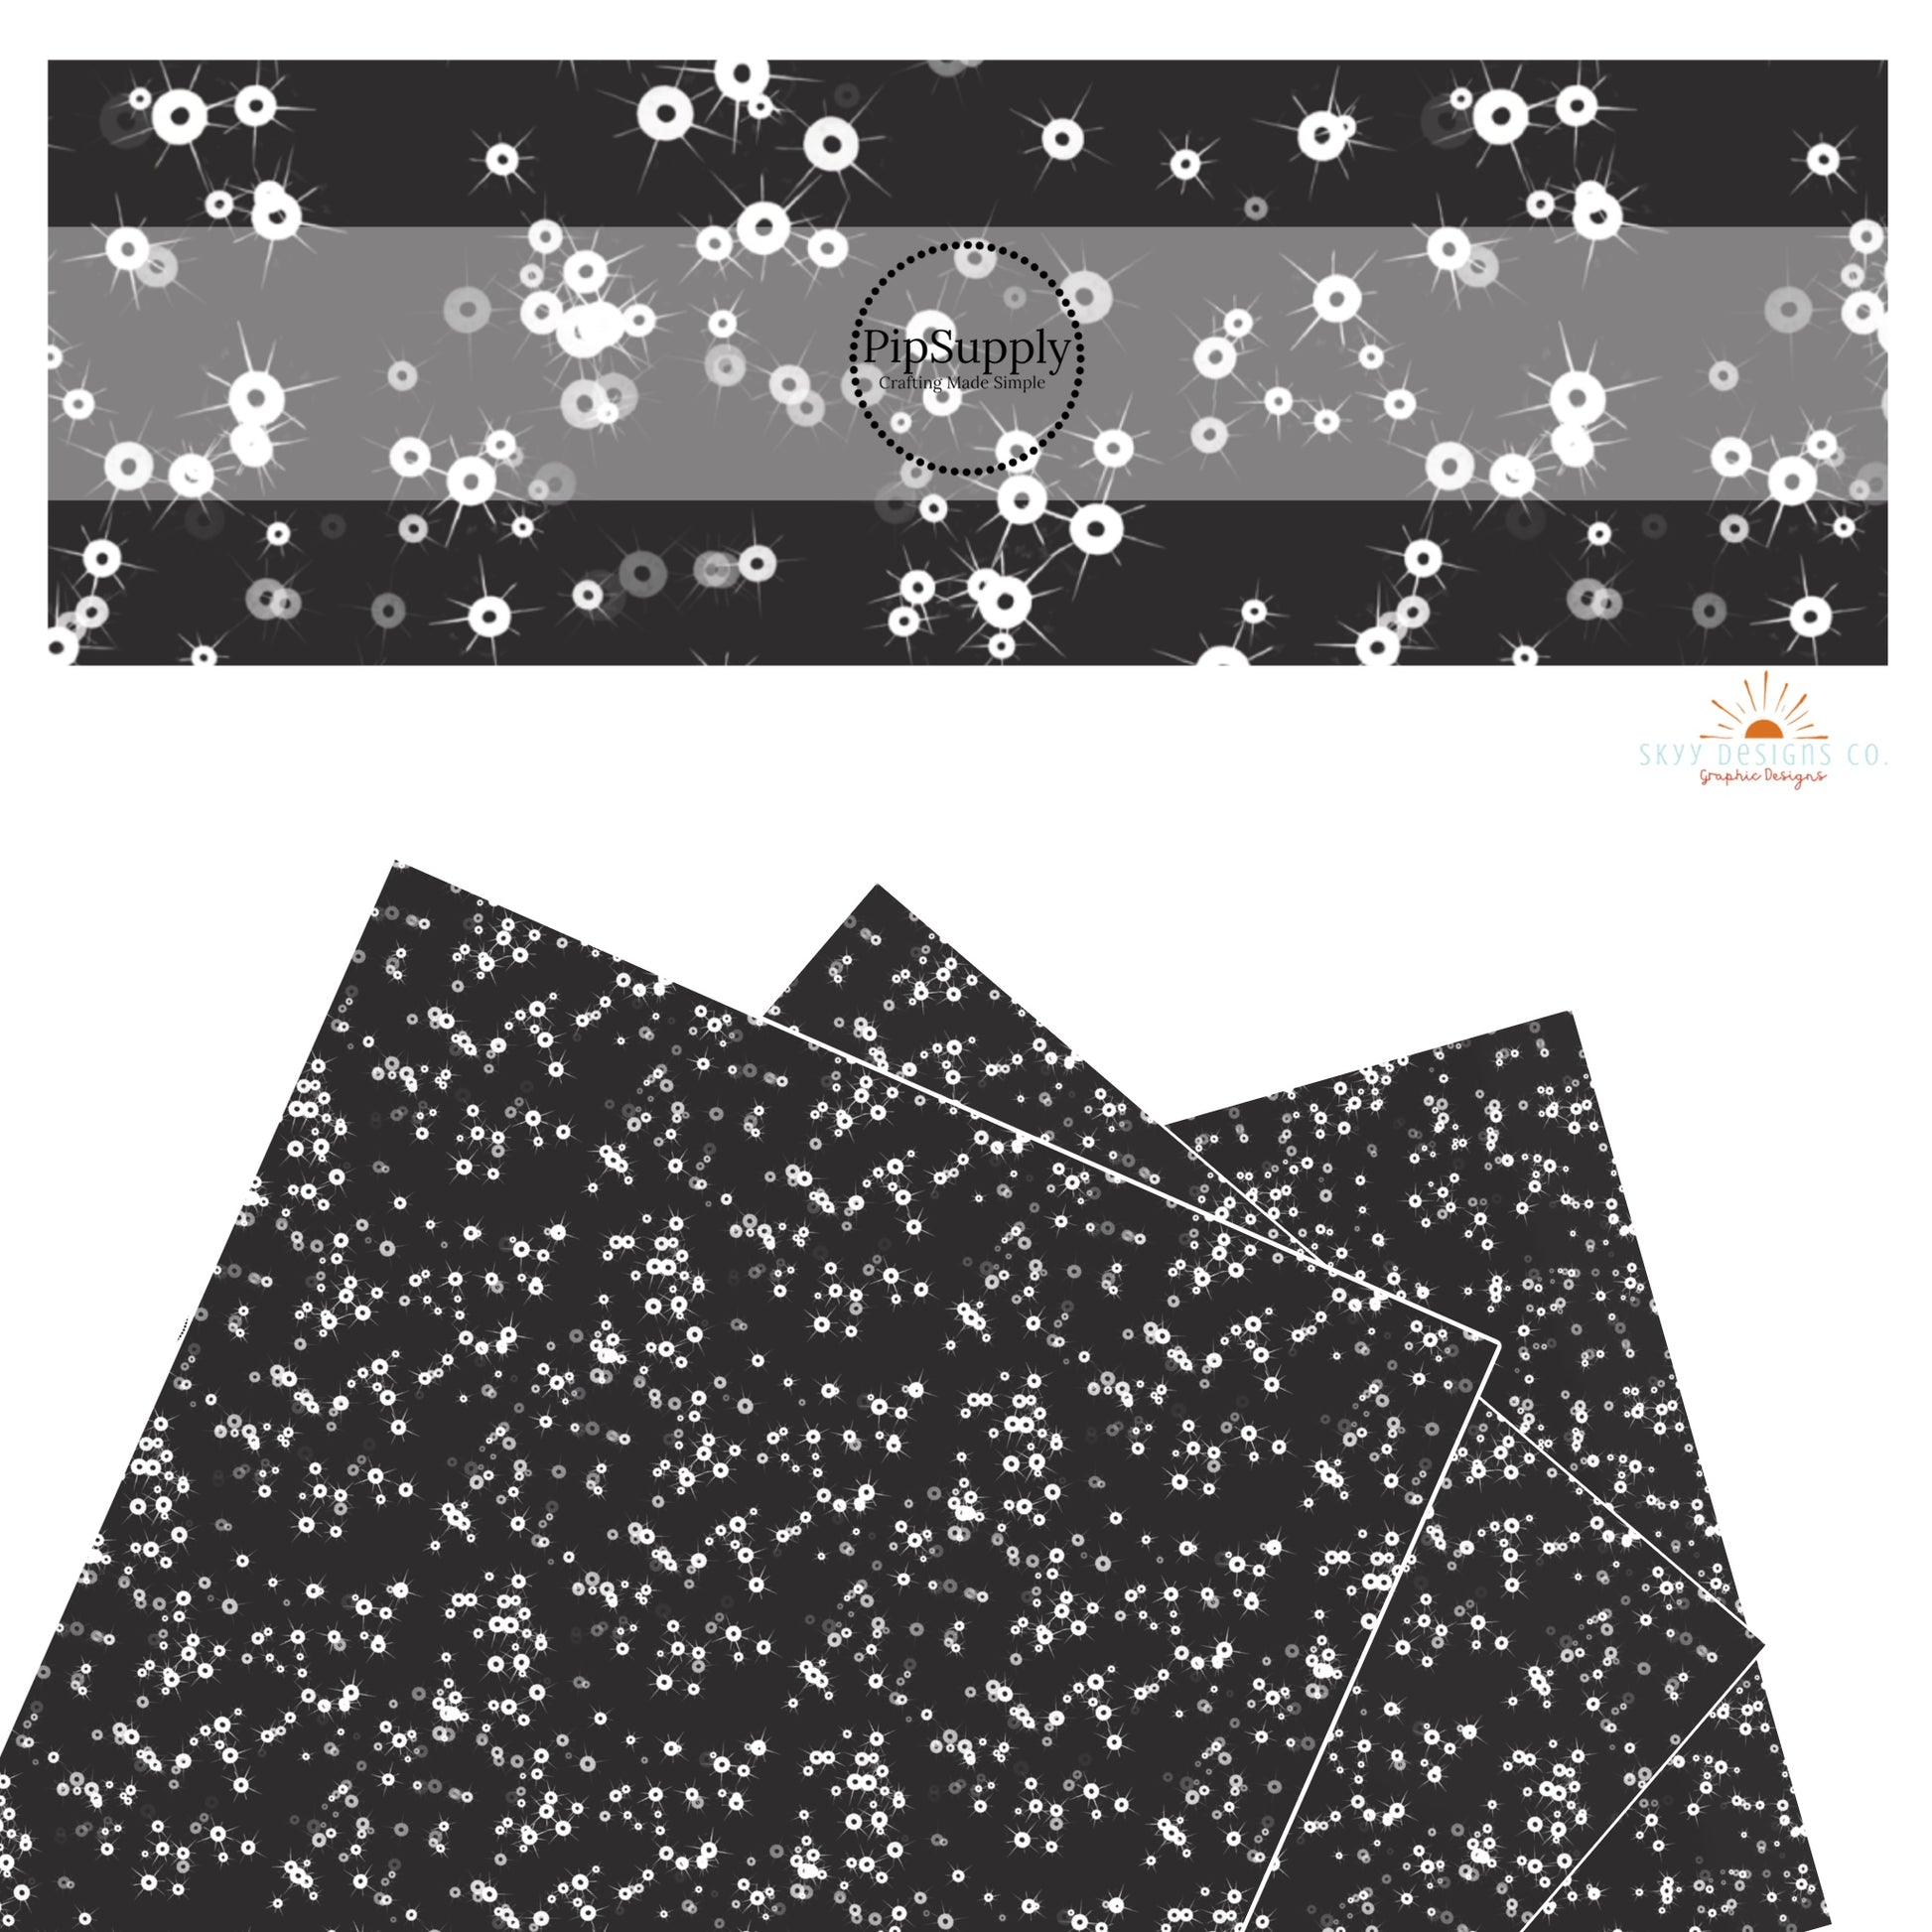 Bright silver sparkling sequins on black faux leather sheets